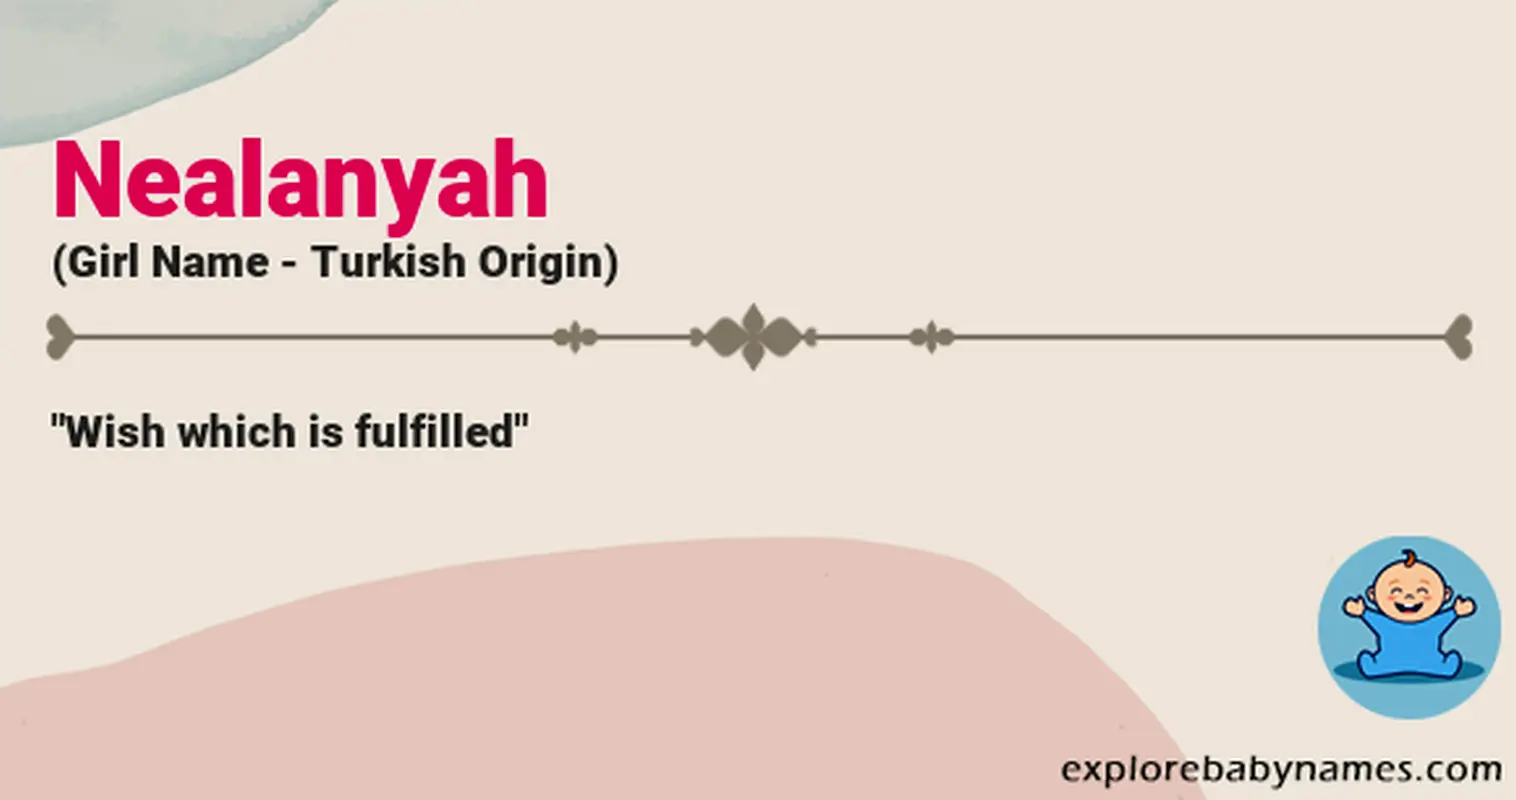 Meaning of Nealanyah